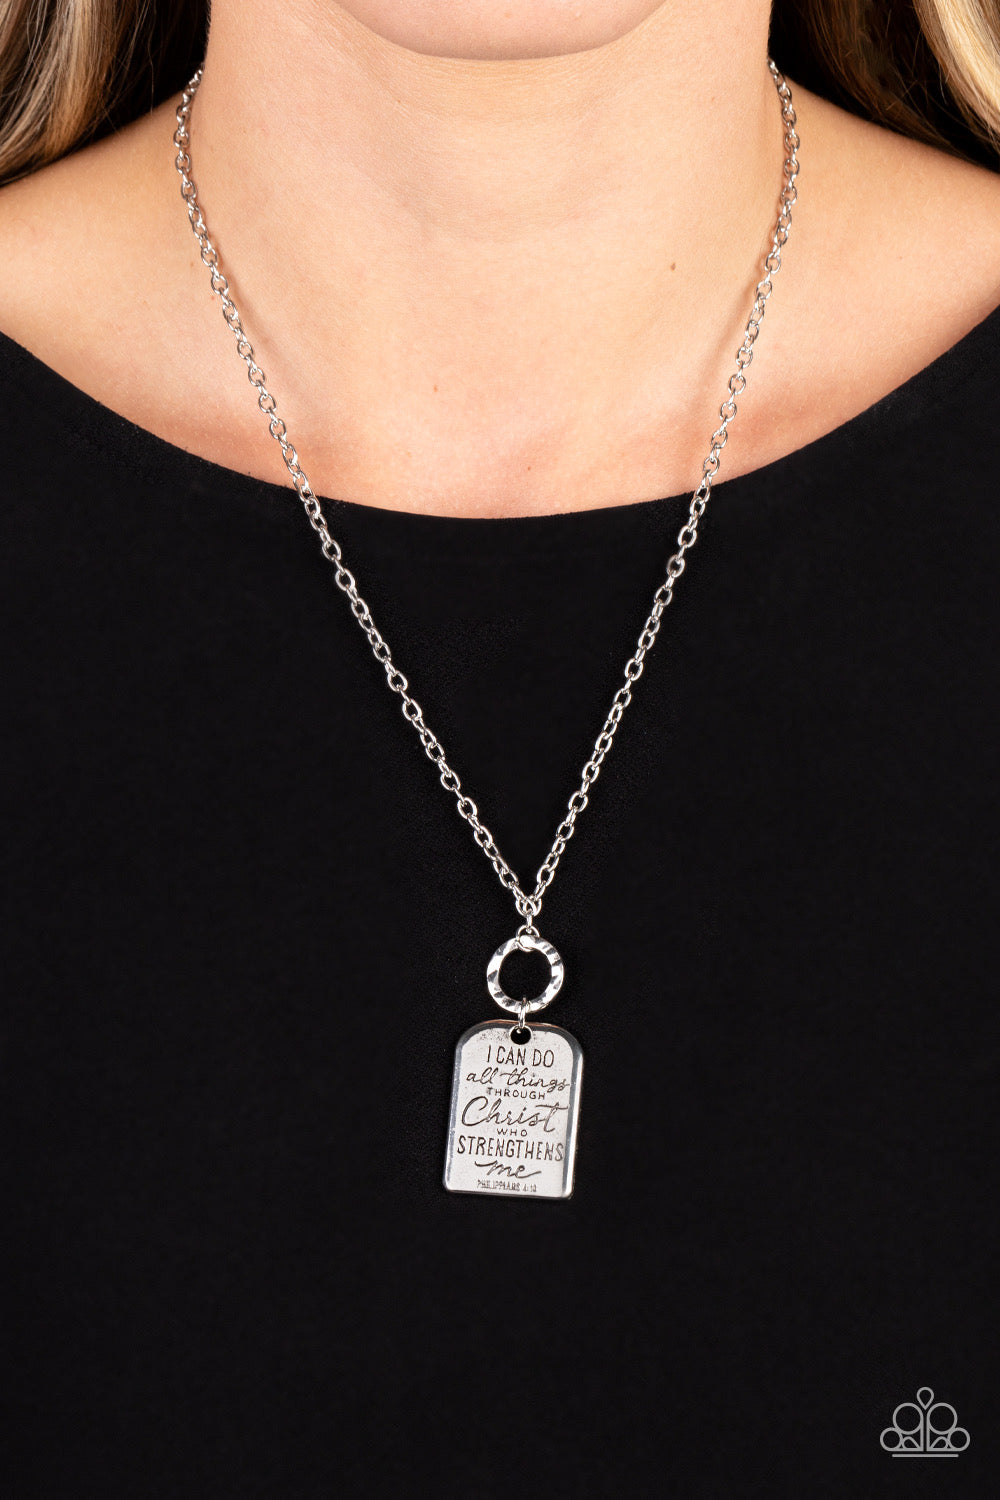 Paparazzi Persevering Philippians - Silver Necklace